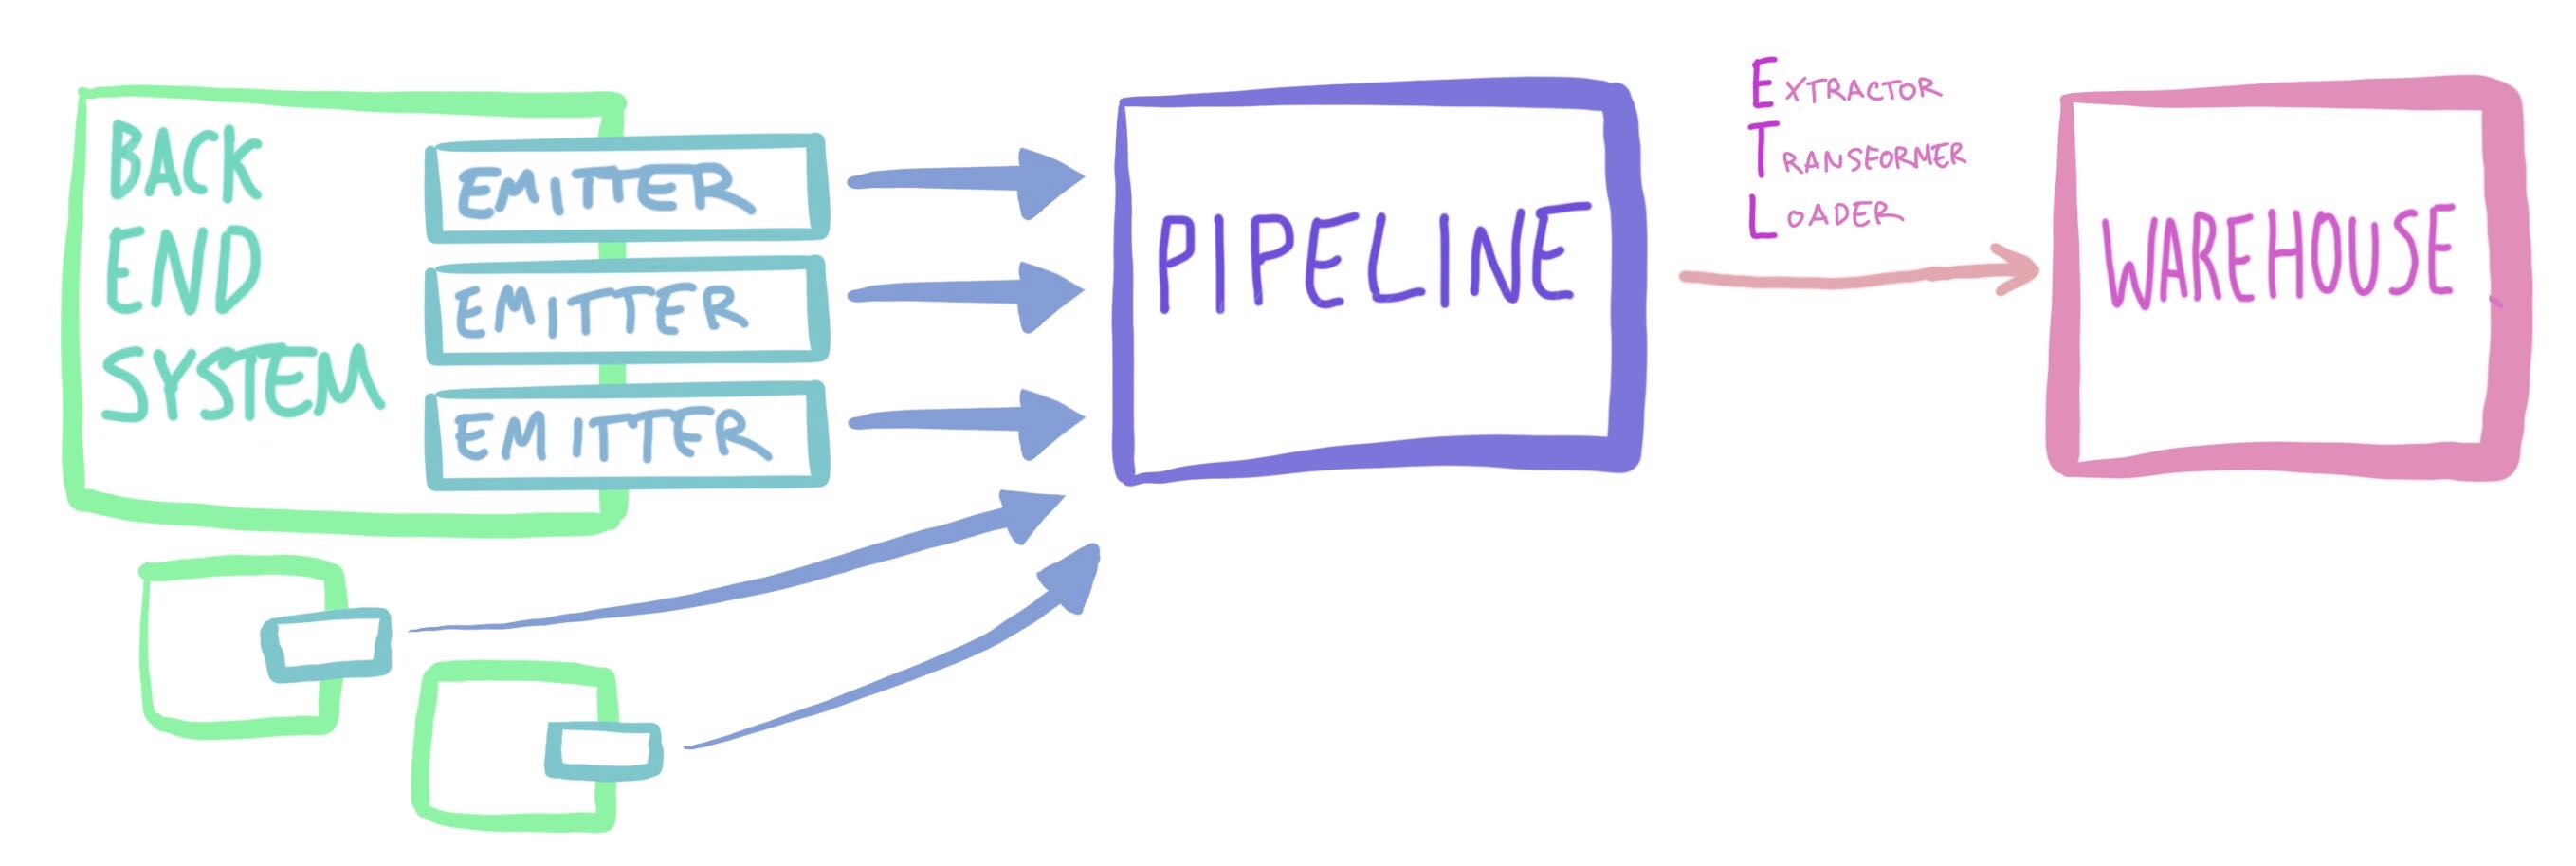 Back end systems emit to the pipeline, then the ETL process moves that data into the warehouse